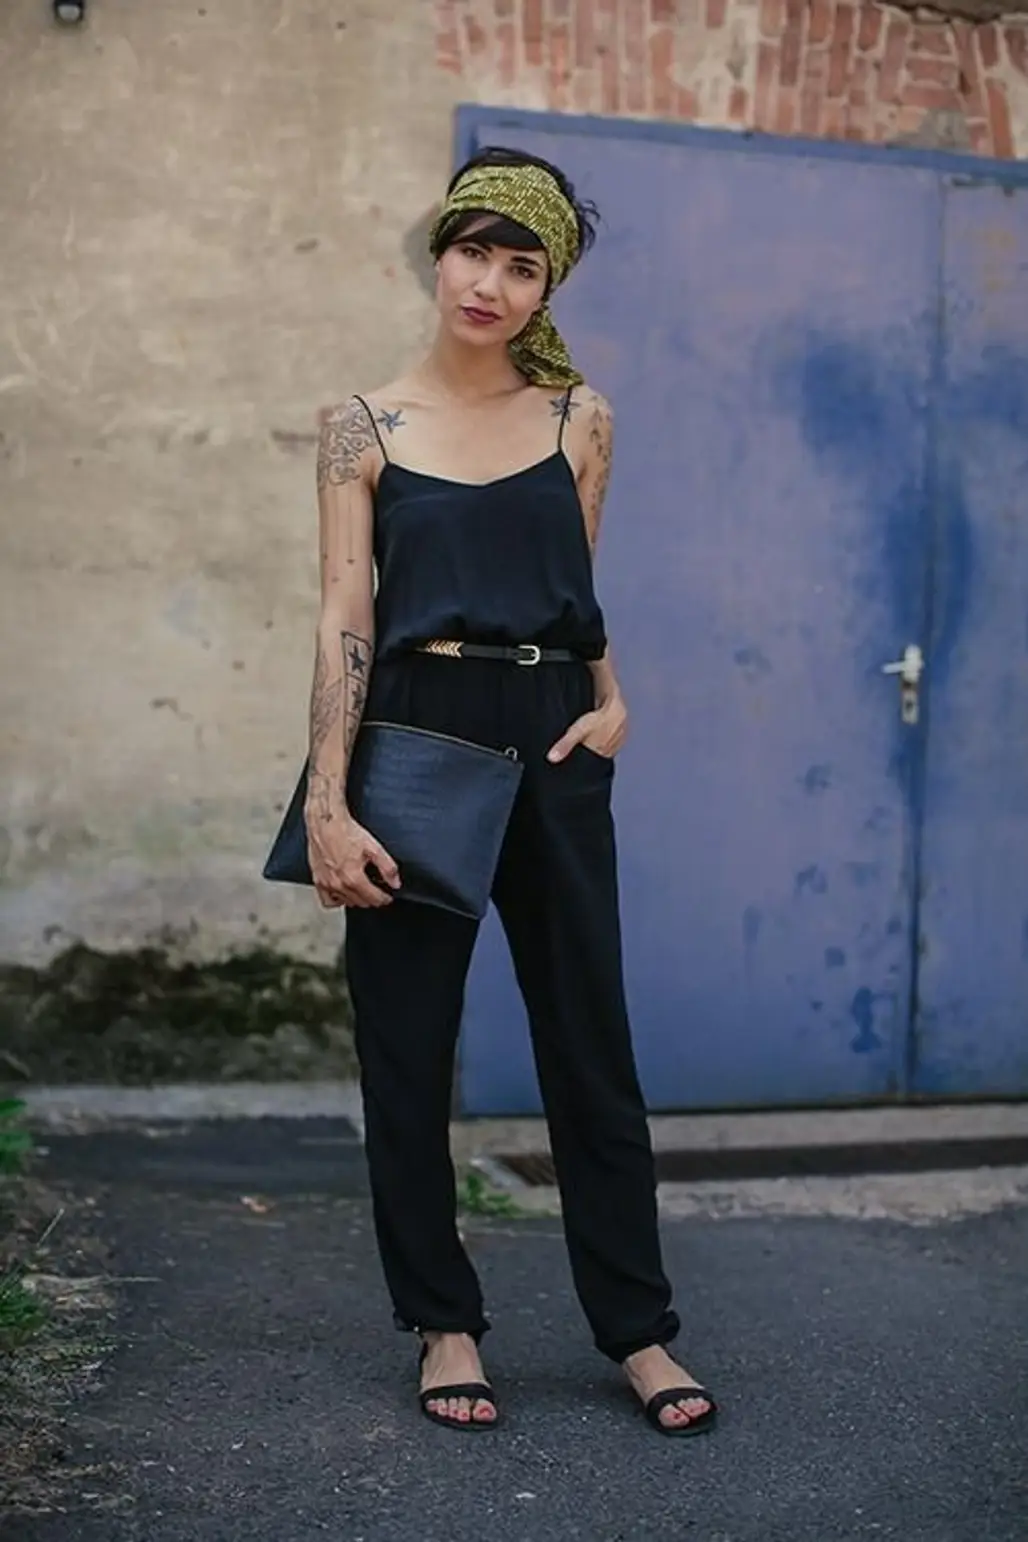 Cool And Classy Black Jumpsuit – Street Style Stalk